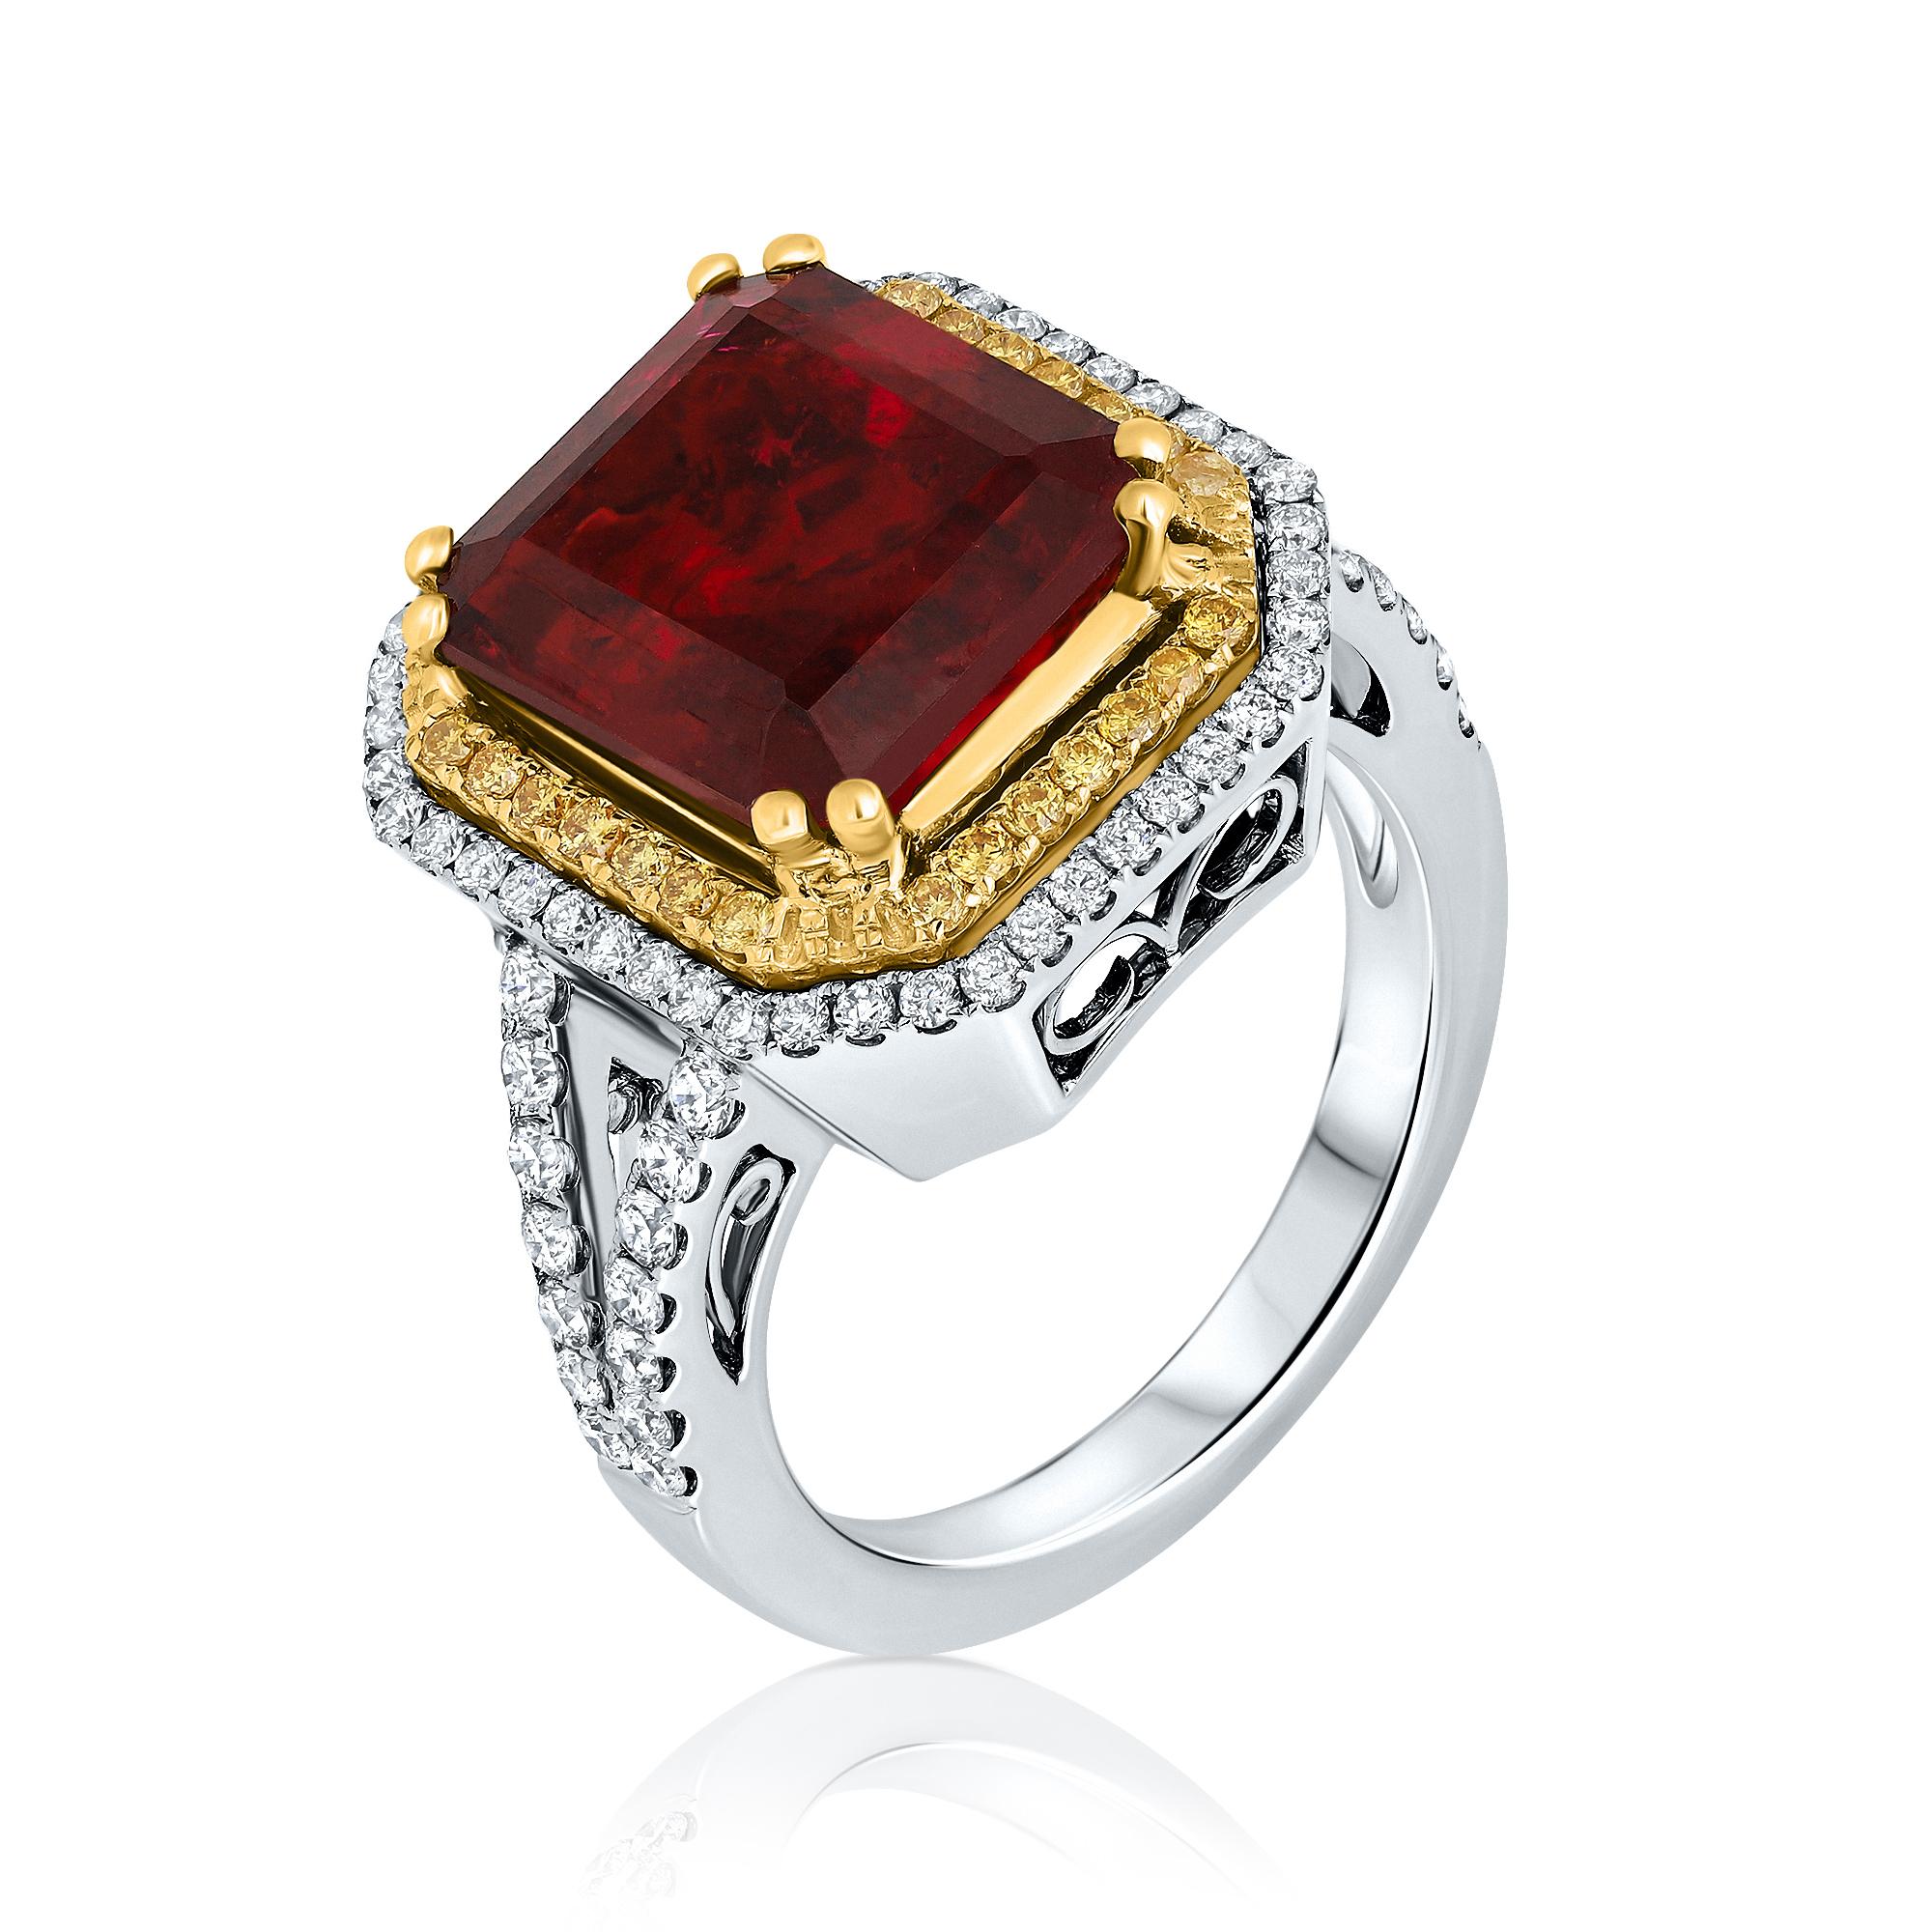 Contemporary 7.47 Carat Red Tourmaline with Yellow Diamond Double Halo Ring Set in 18K Gold. For Sale